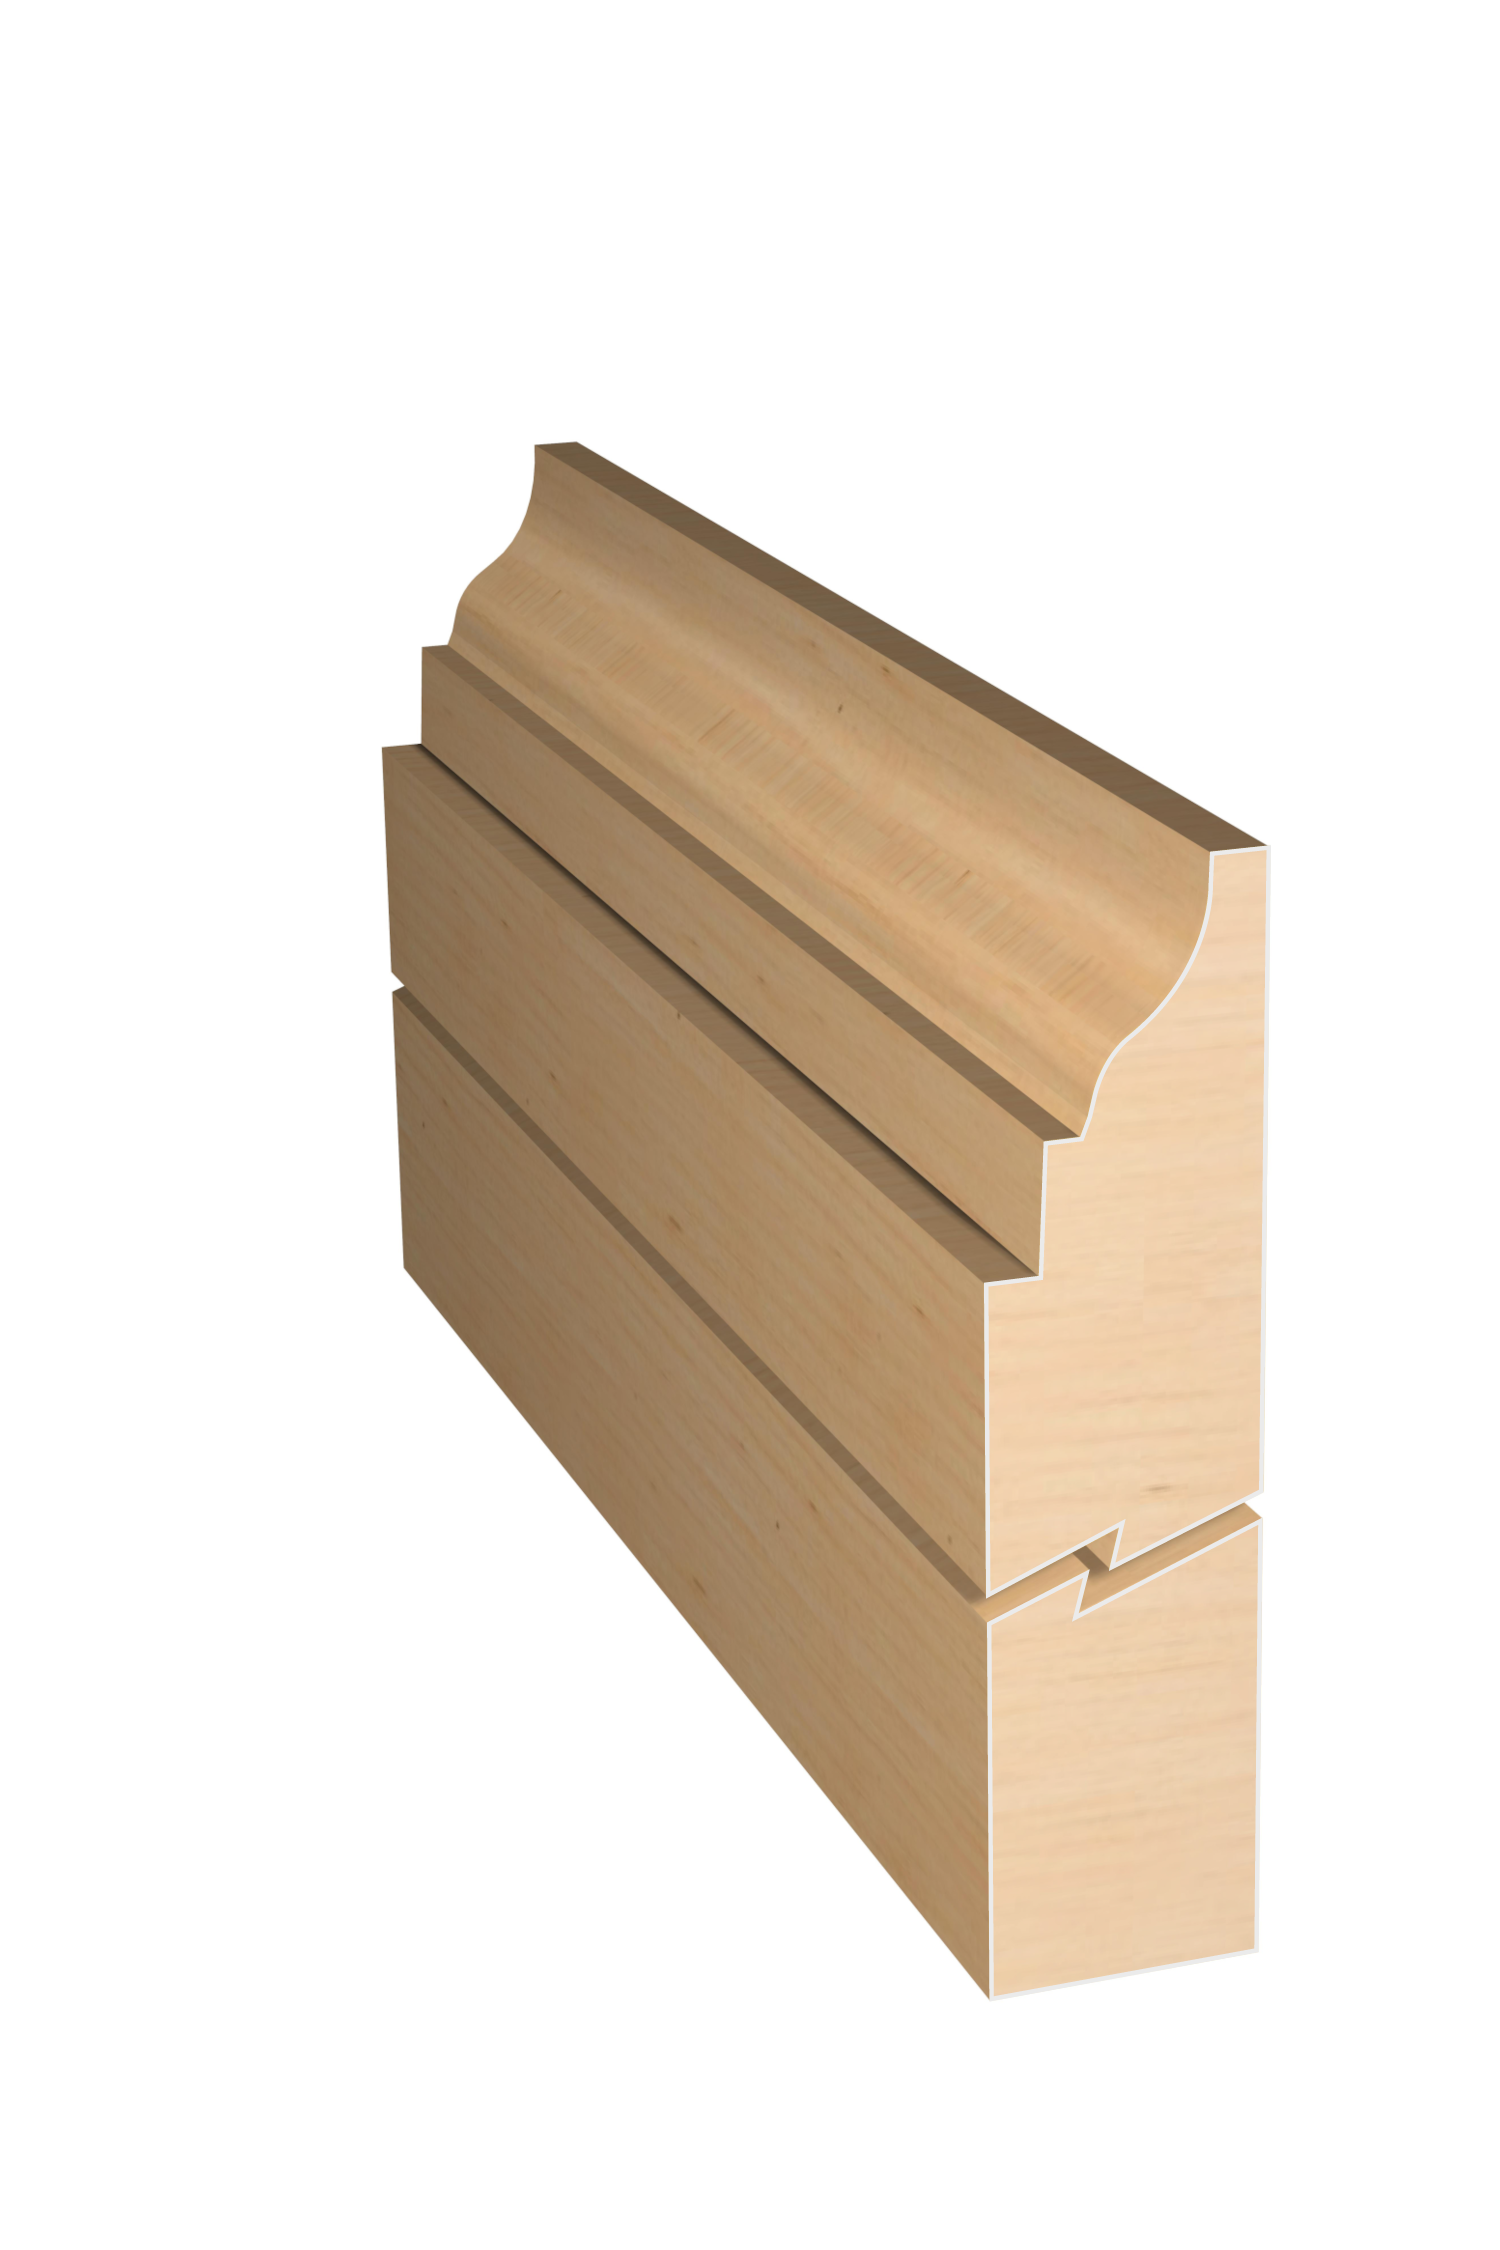 Three dimensional rendering of custom edge profile wood molding SKPL6 made by Public Lumber Company in Detroit.